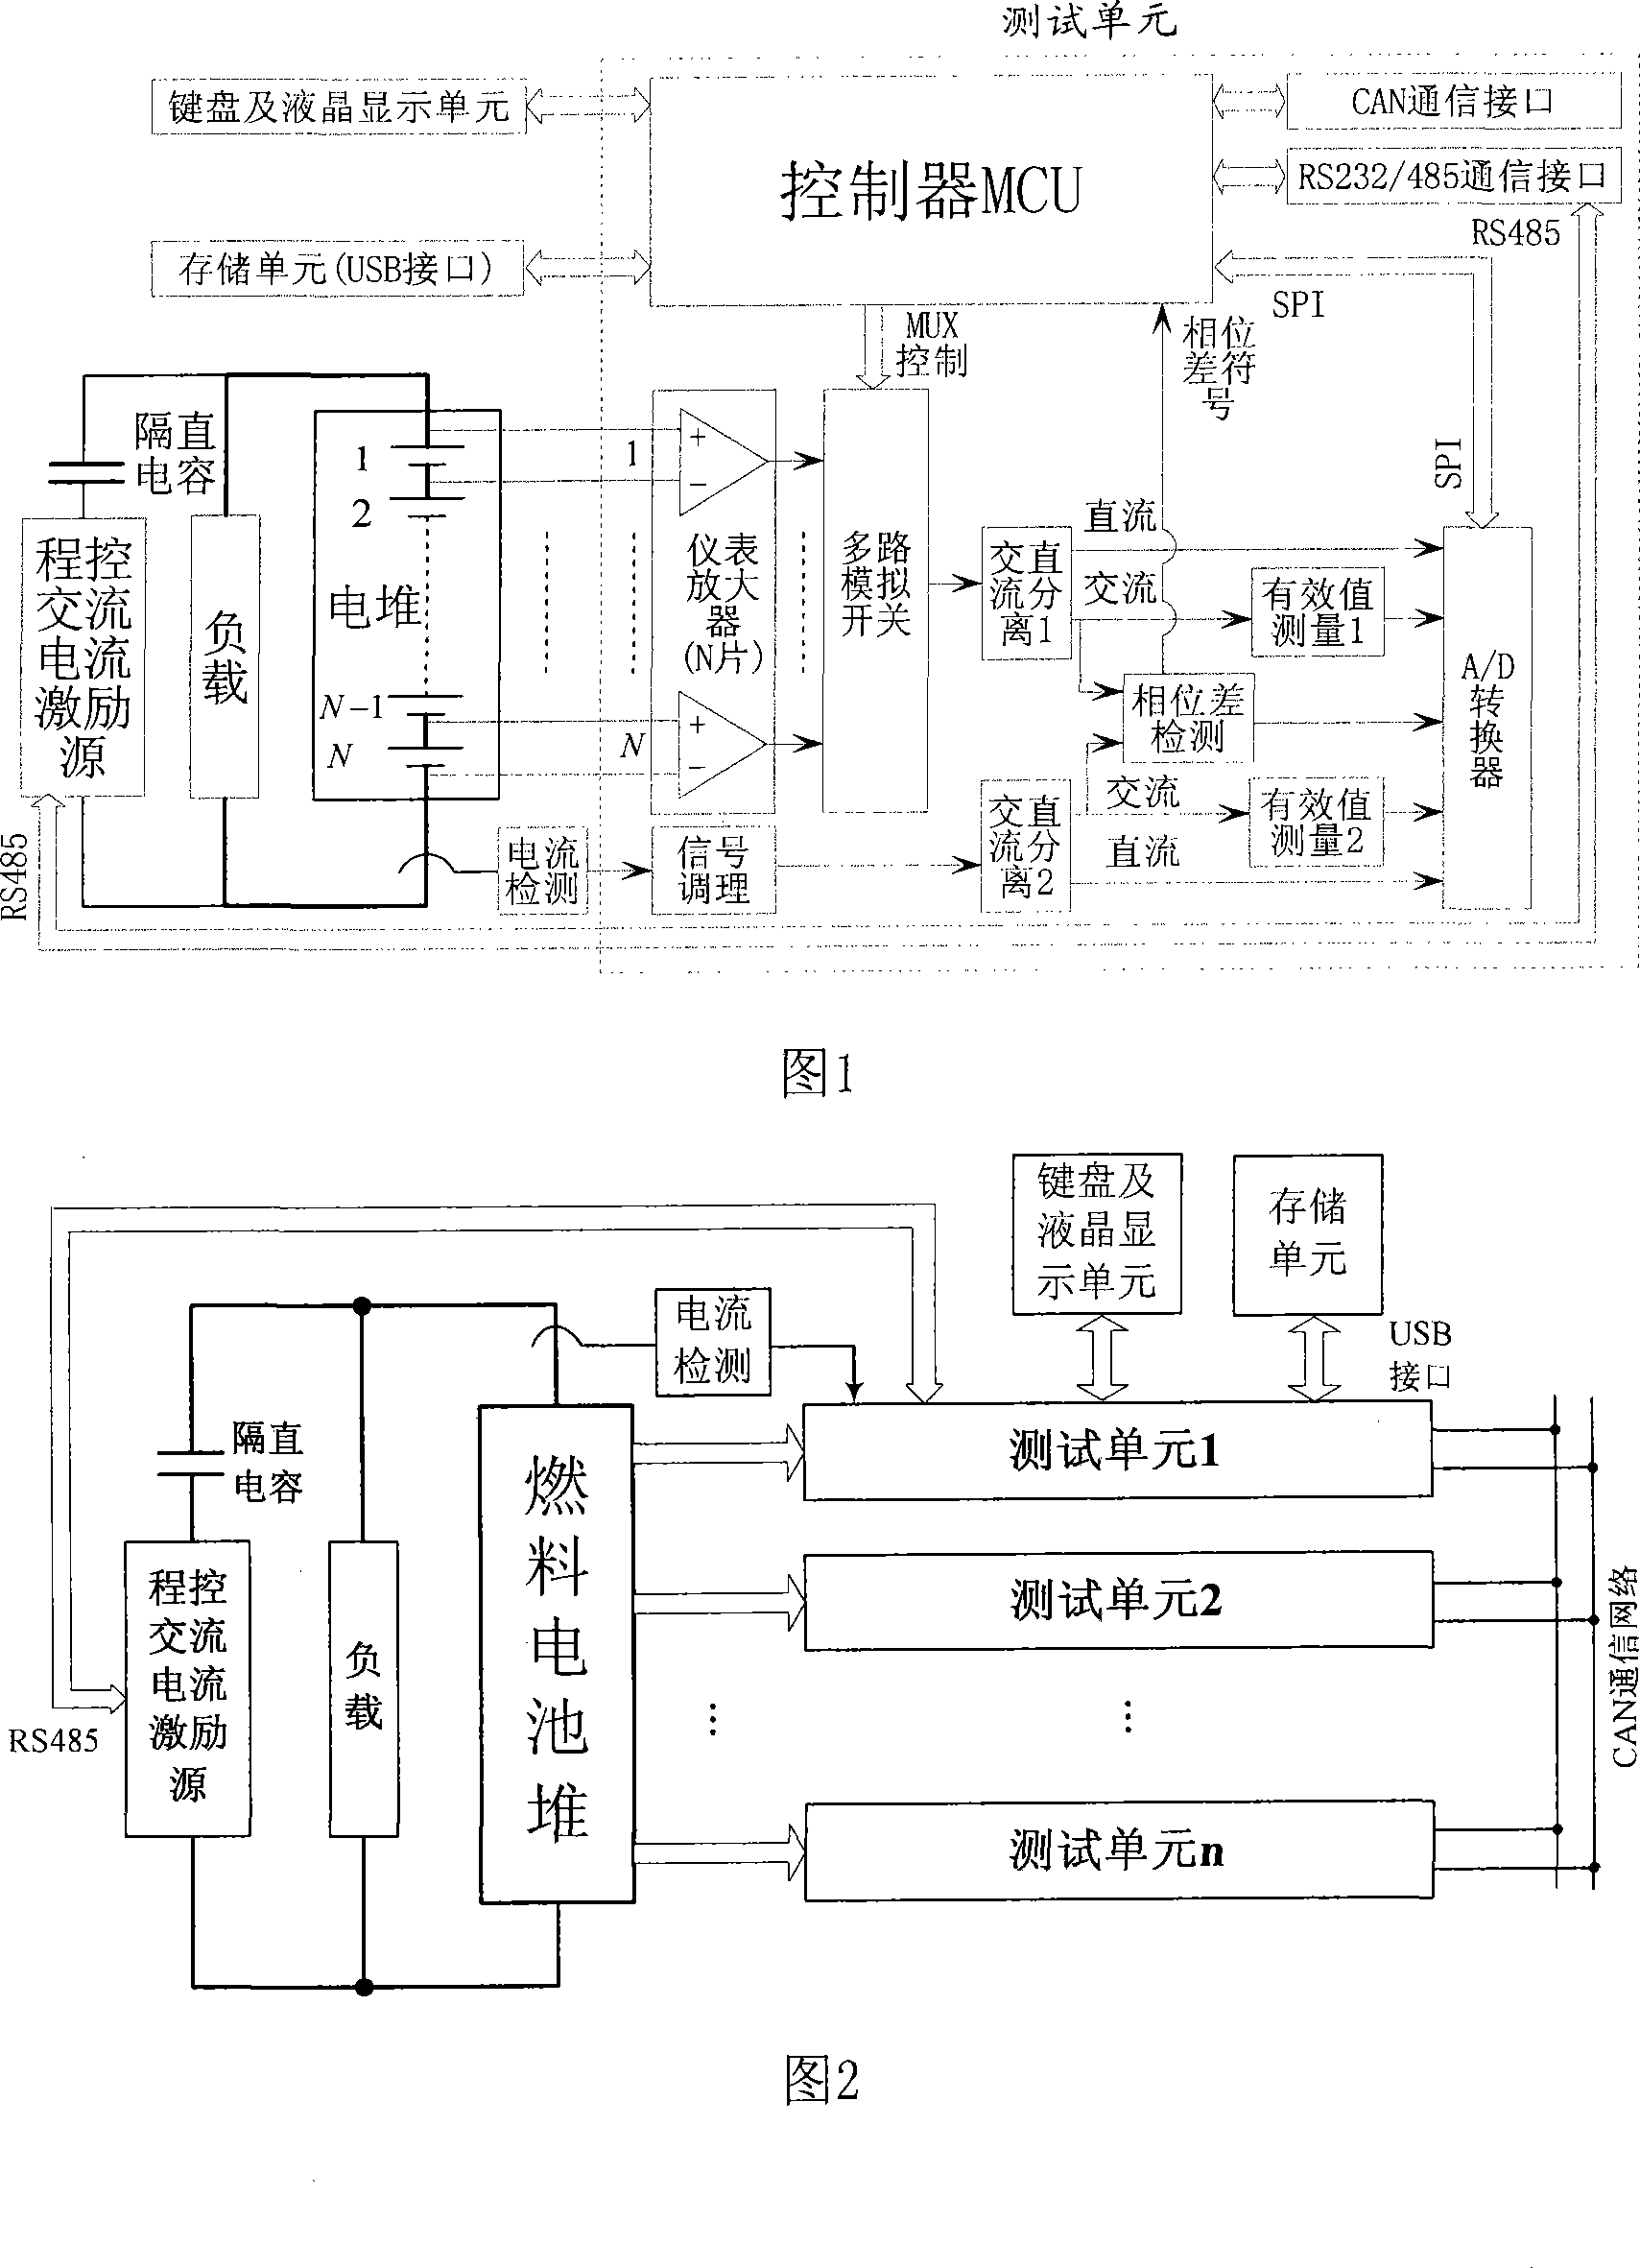 Single slice battery essential resistance and voltage on-line testing system for fuel cell pile